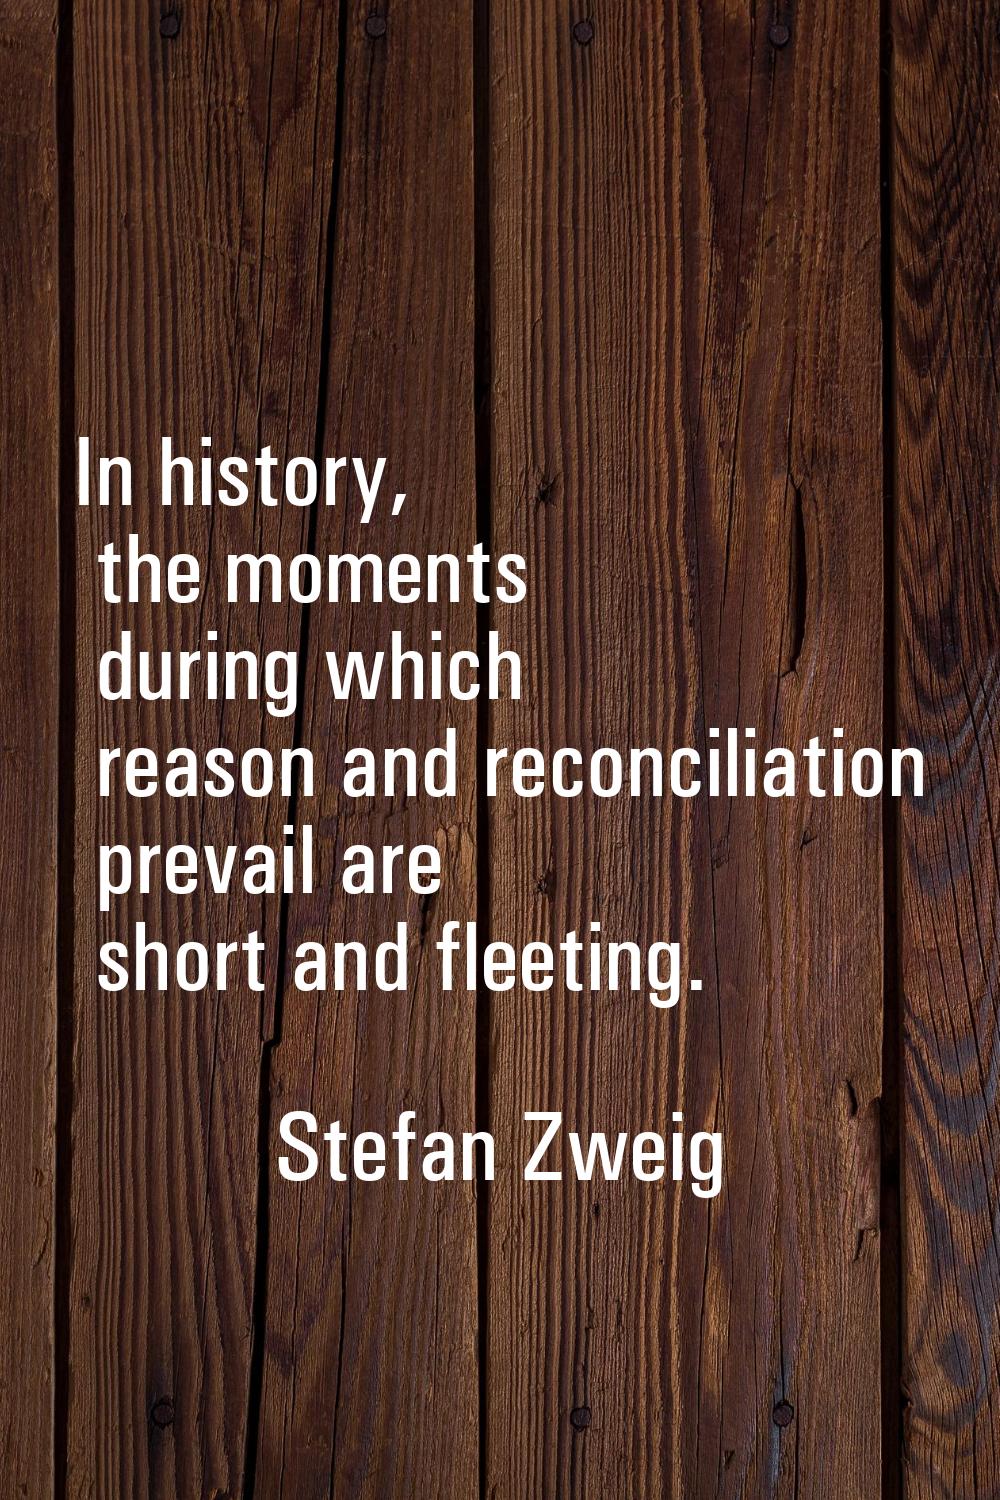 In history, the moments during which reason and reconciliation prevail are short and fleeting.